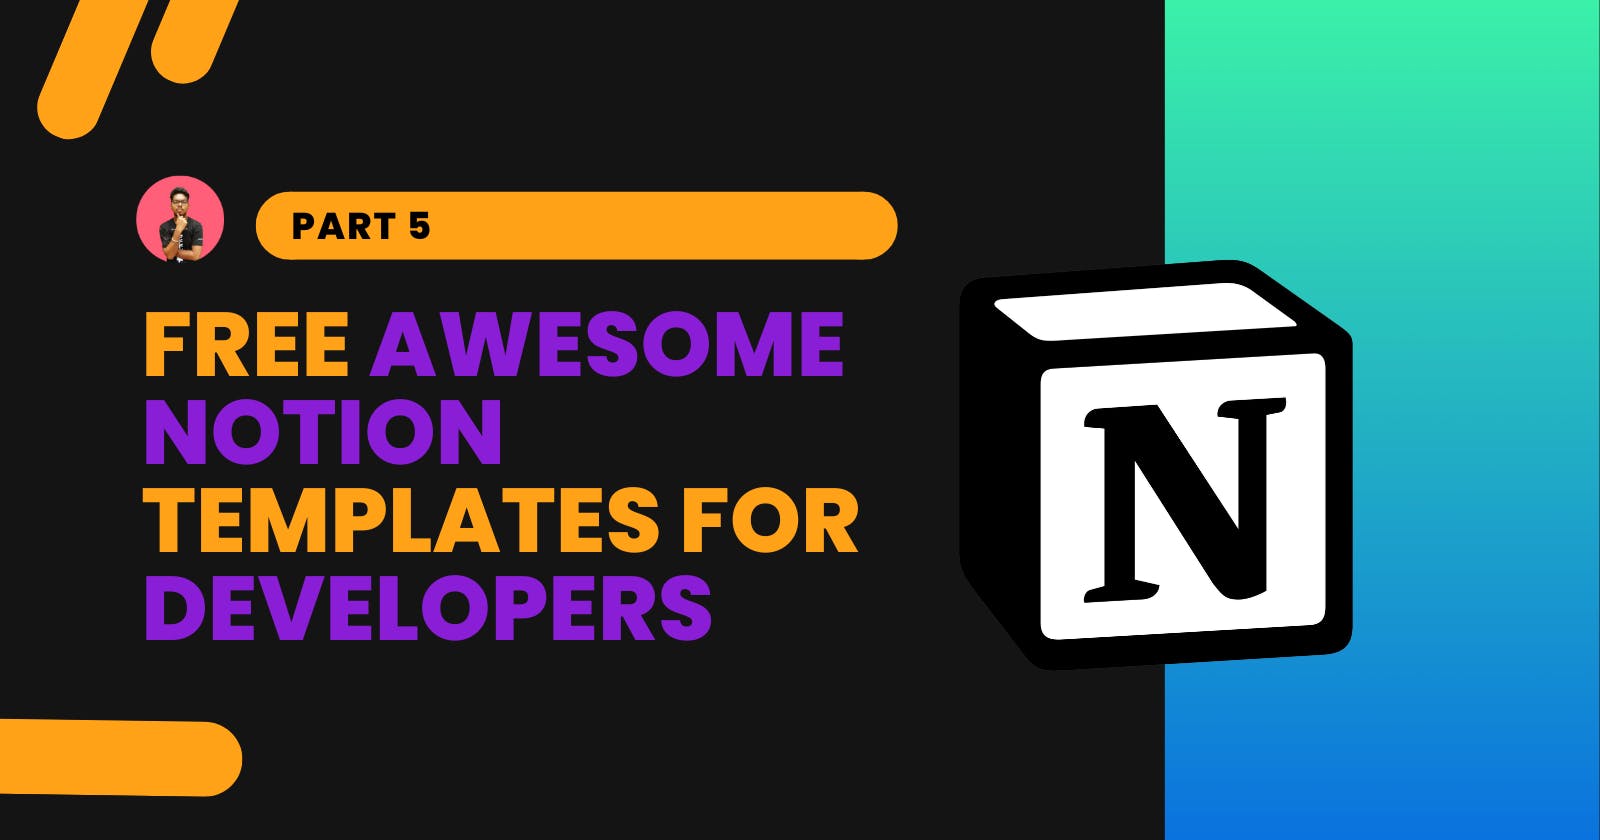 Free Awesome Notion Templates for Developers